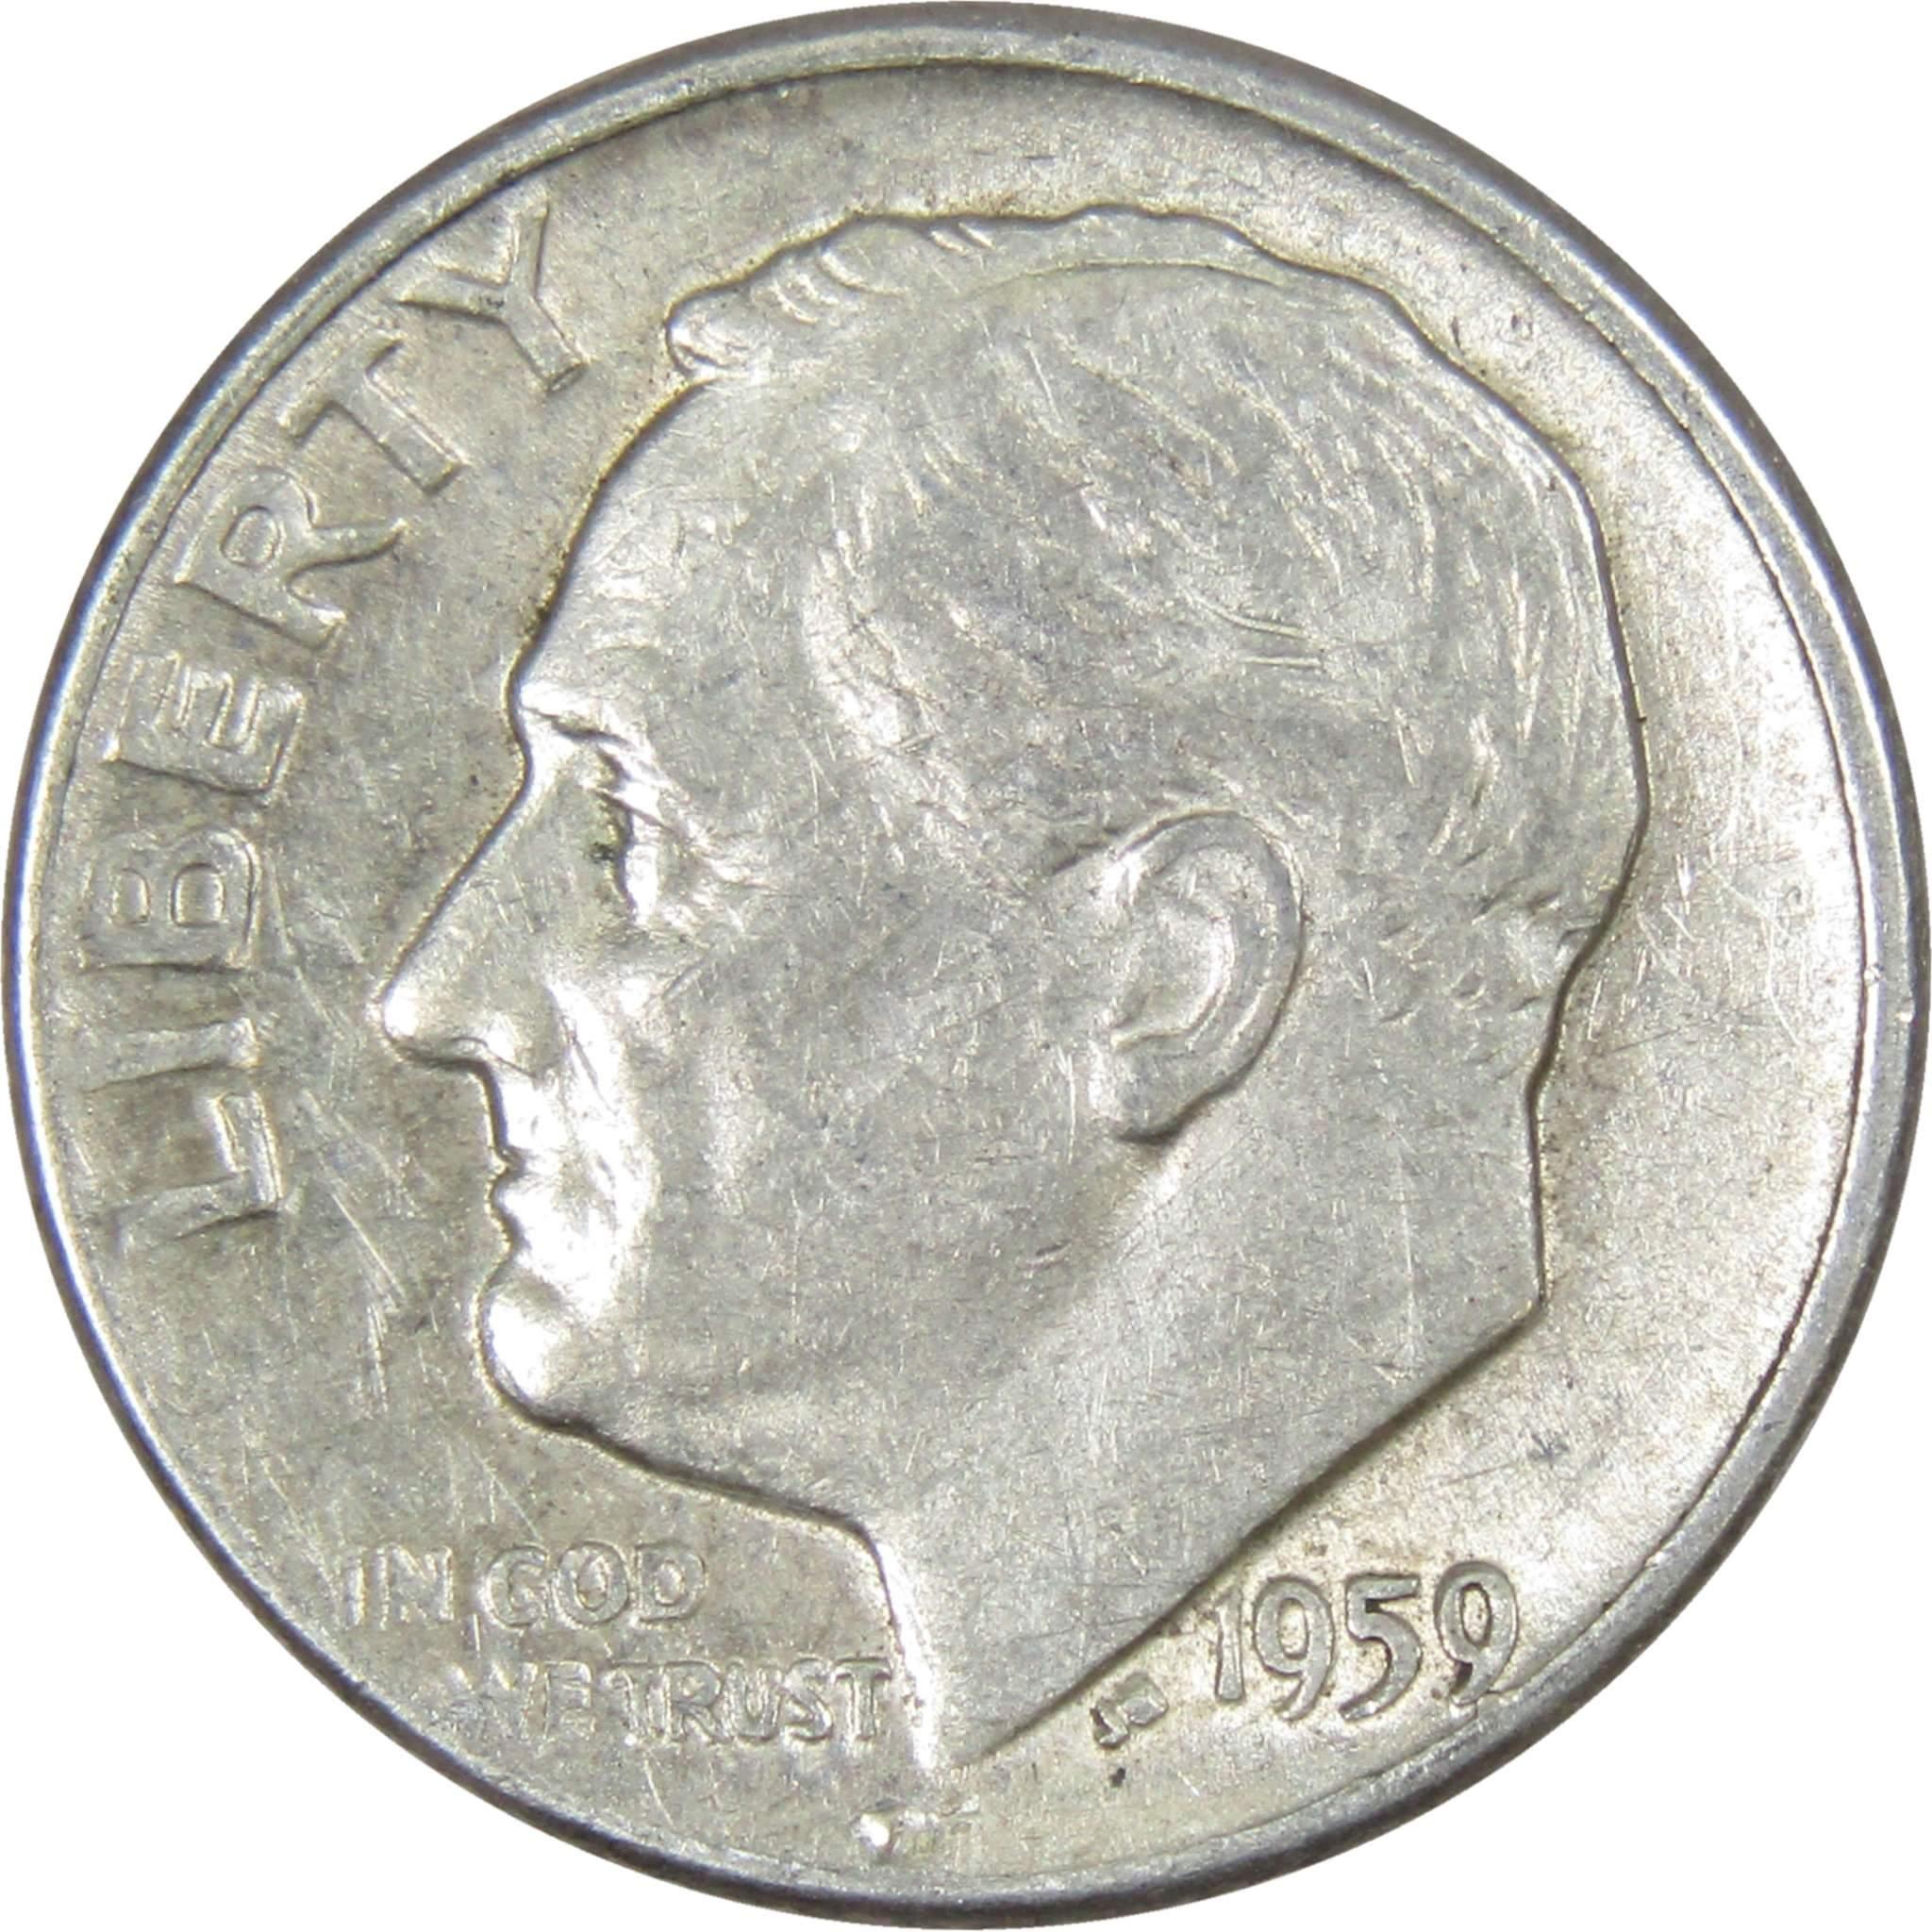 1959 D Roosevelt Dime AG About Good 90% Silver 10c US Coin Collectible